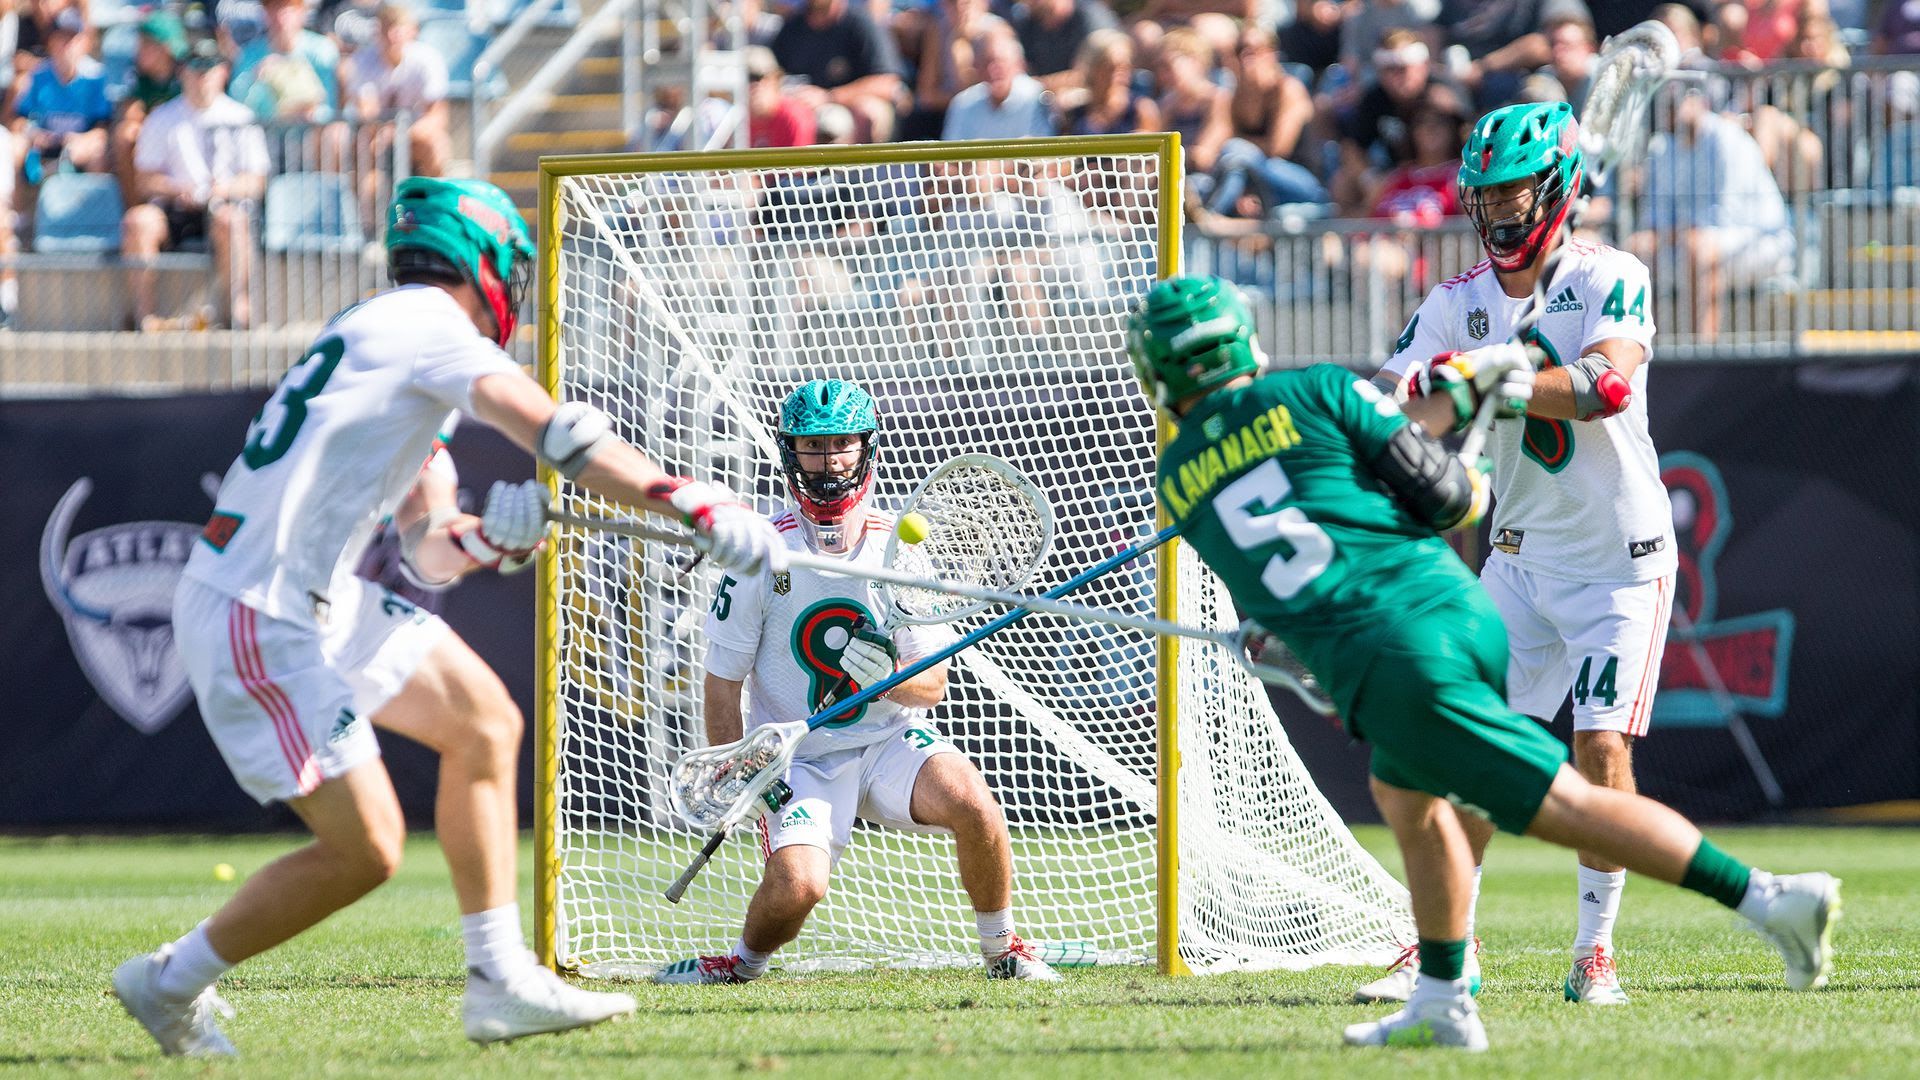 Premier league lacrosse players playing the game.